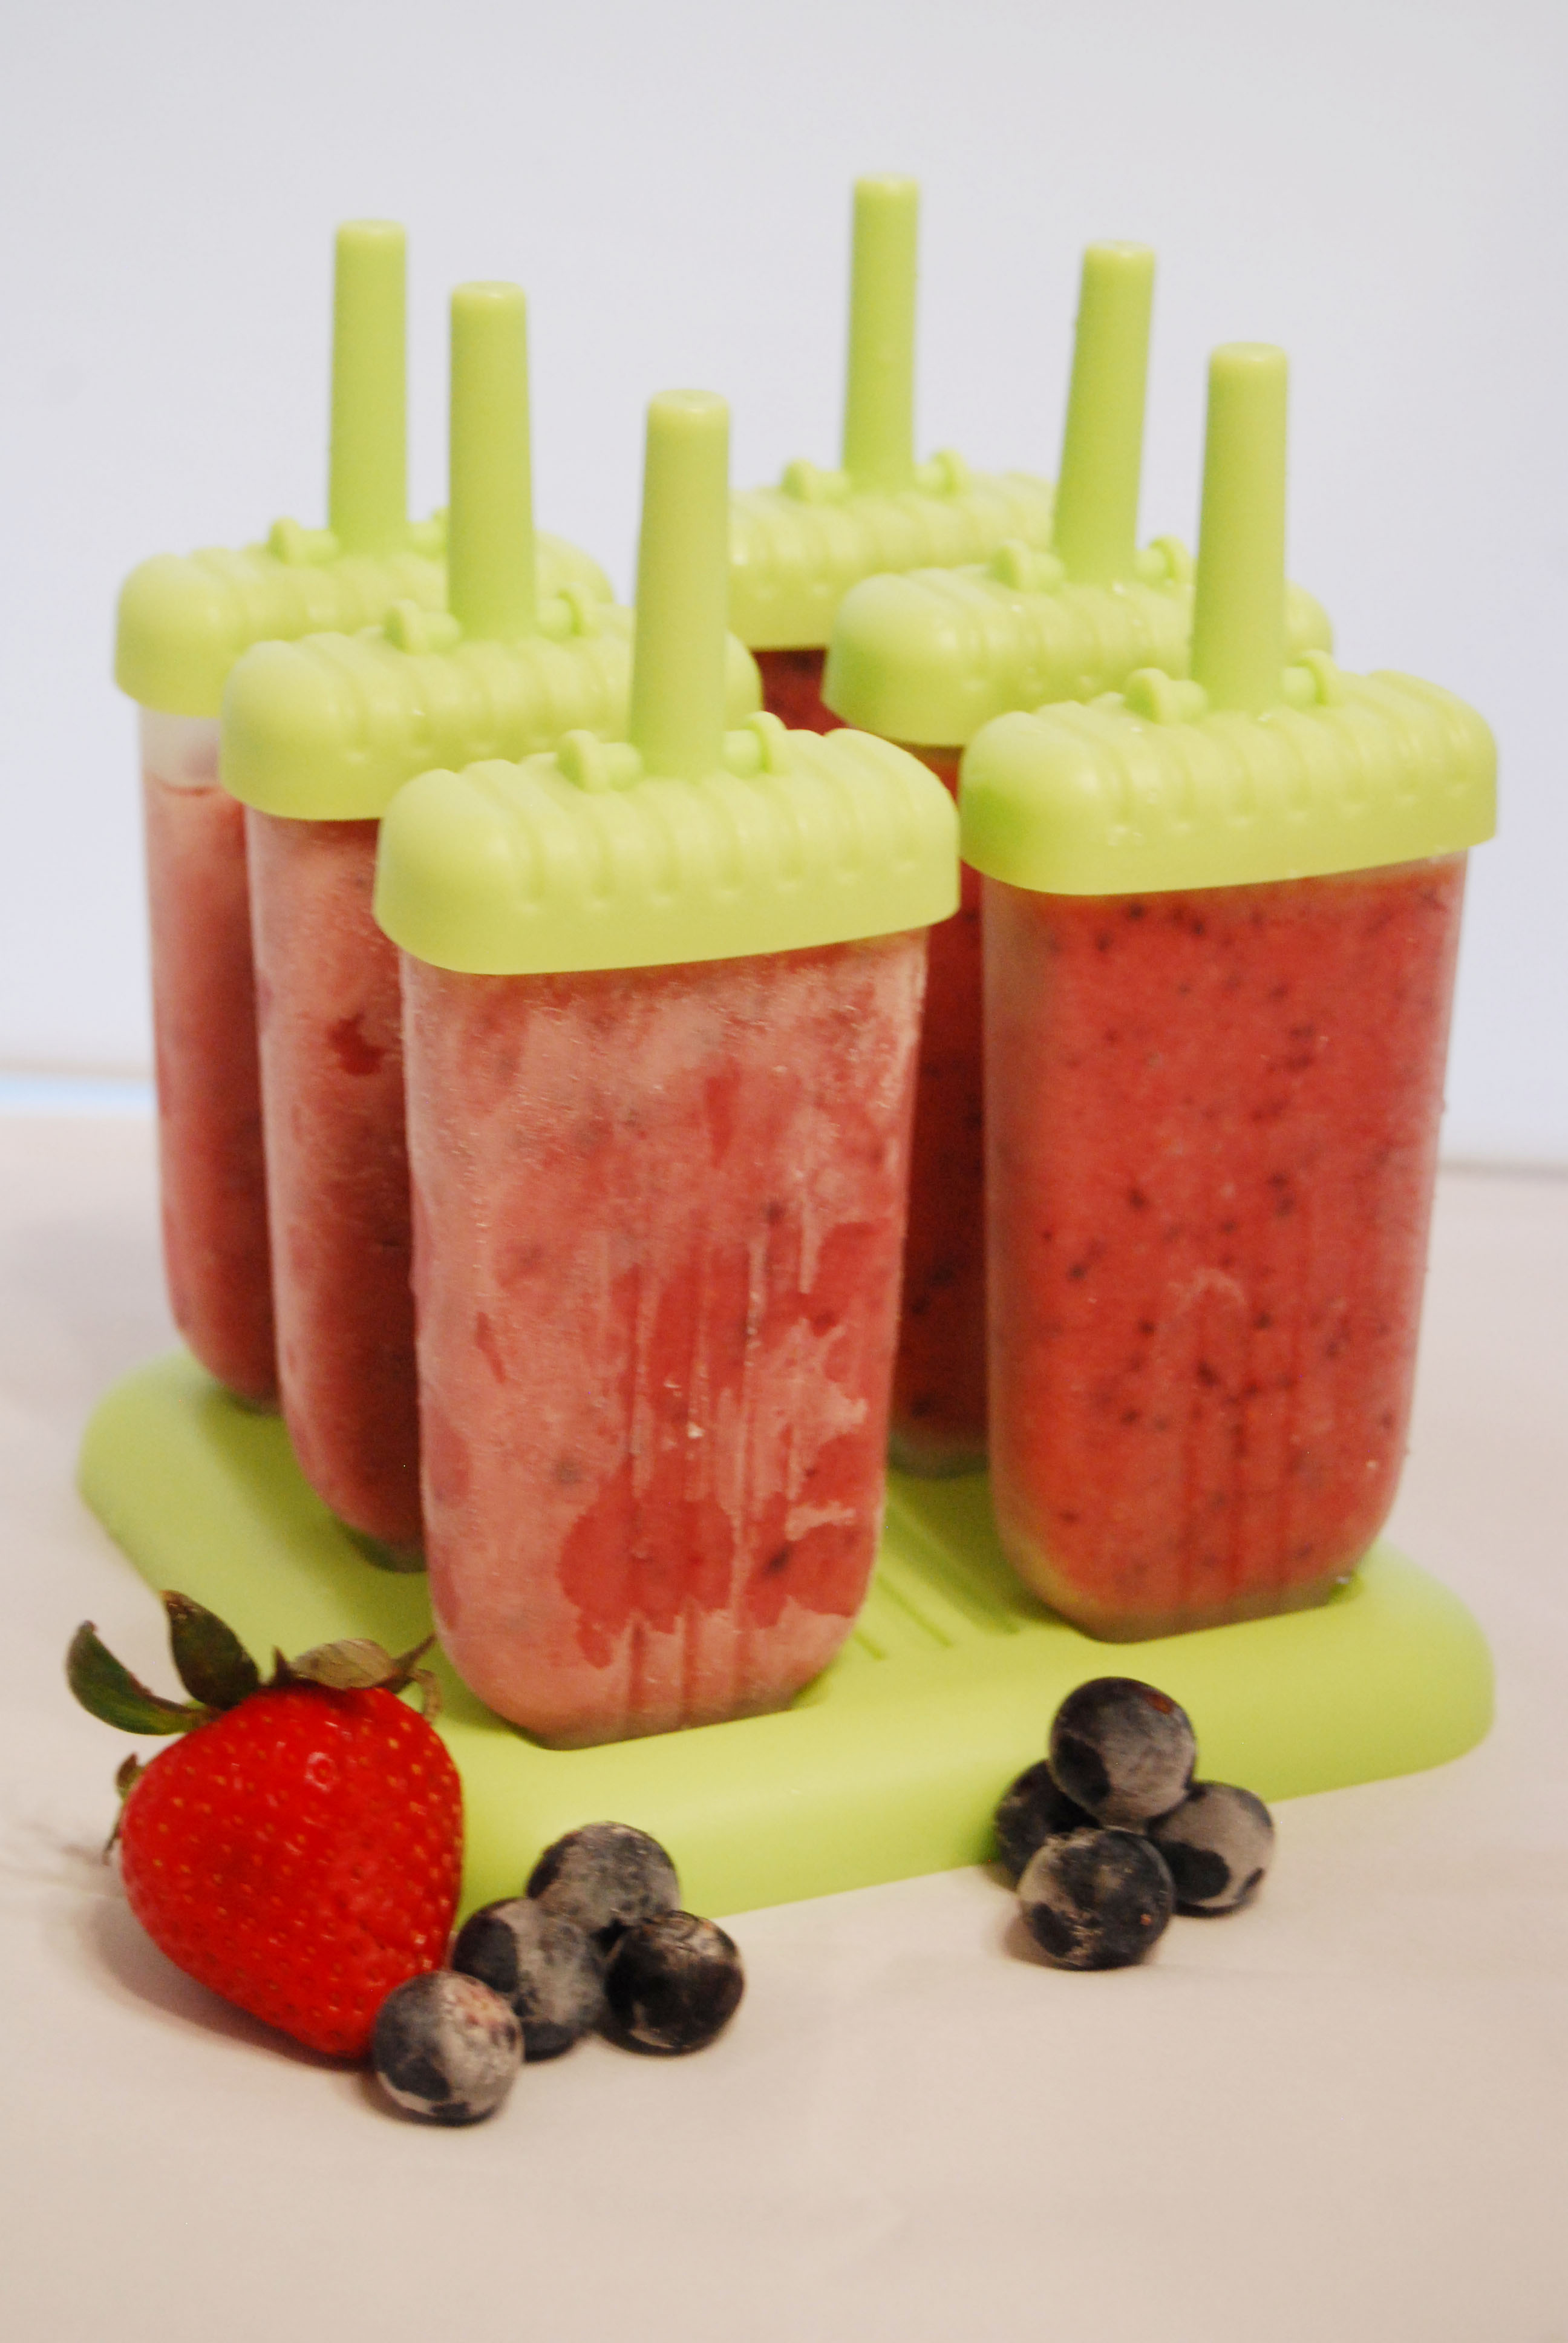 These Healthy Strawberry Apple Ice Pops are the perfect treat any time of day! This recipe is made with only fruit and no added sugar, and is a healthier alternative to Popsicles and ice cream, perfect for those of us who are trying to trim down for summer swim suits! Strawberries and apples are a yummy combination for this delicious treat, and instead of sugar, we've just added more fruit! This easy recipe will have you in and out of the kitchen in minutes, and you will love the flavor of this icy treat!